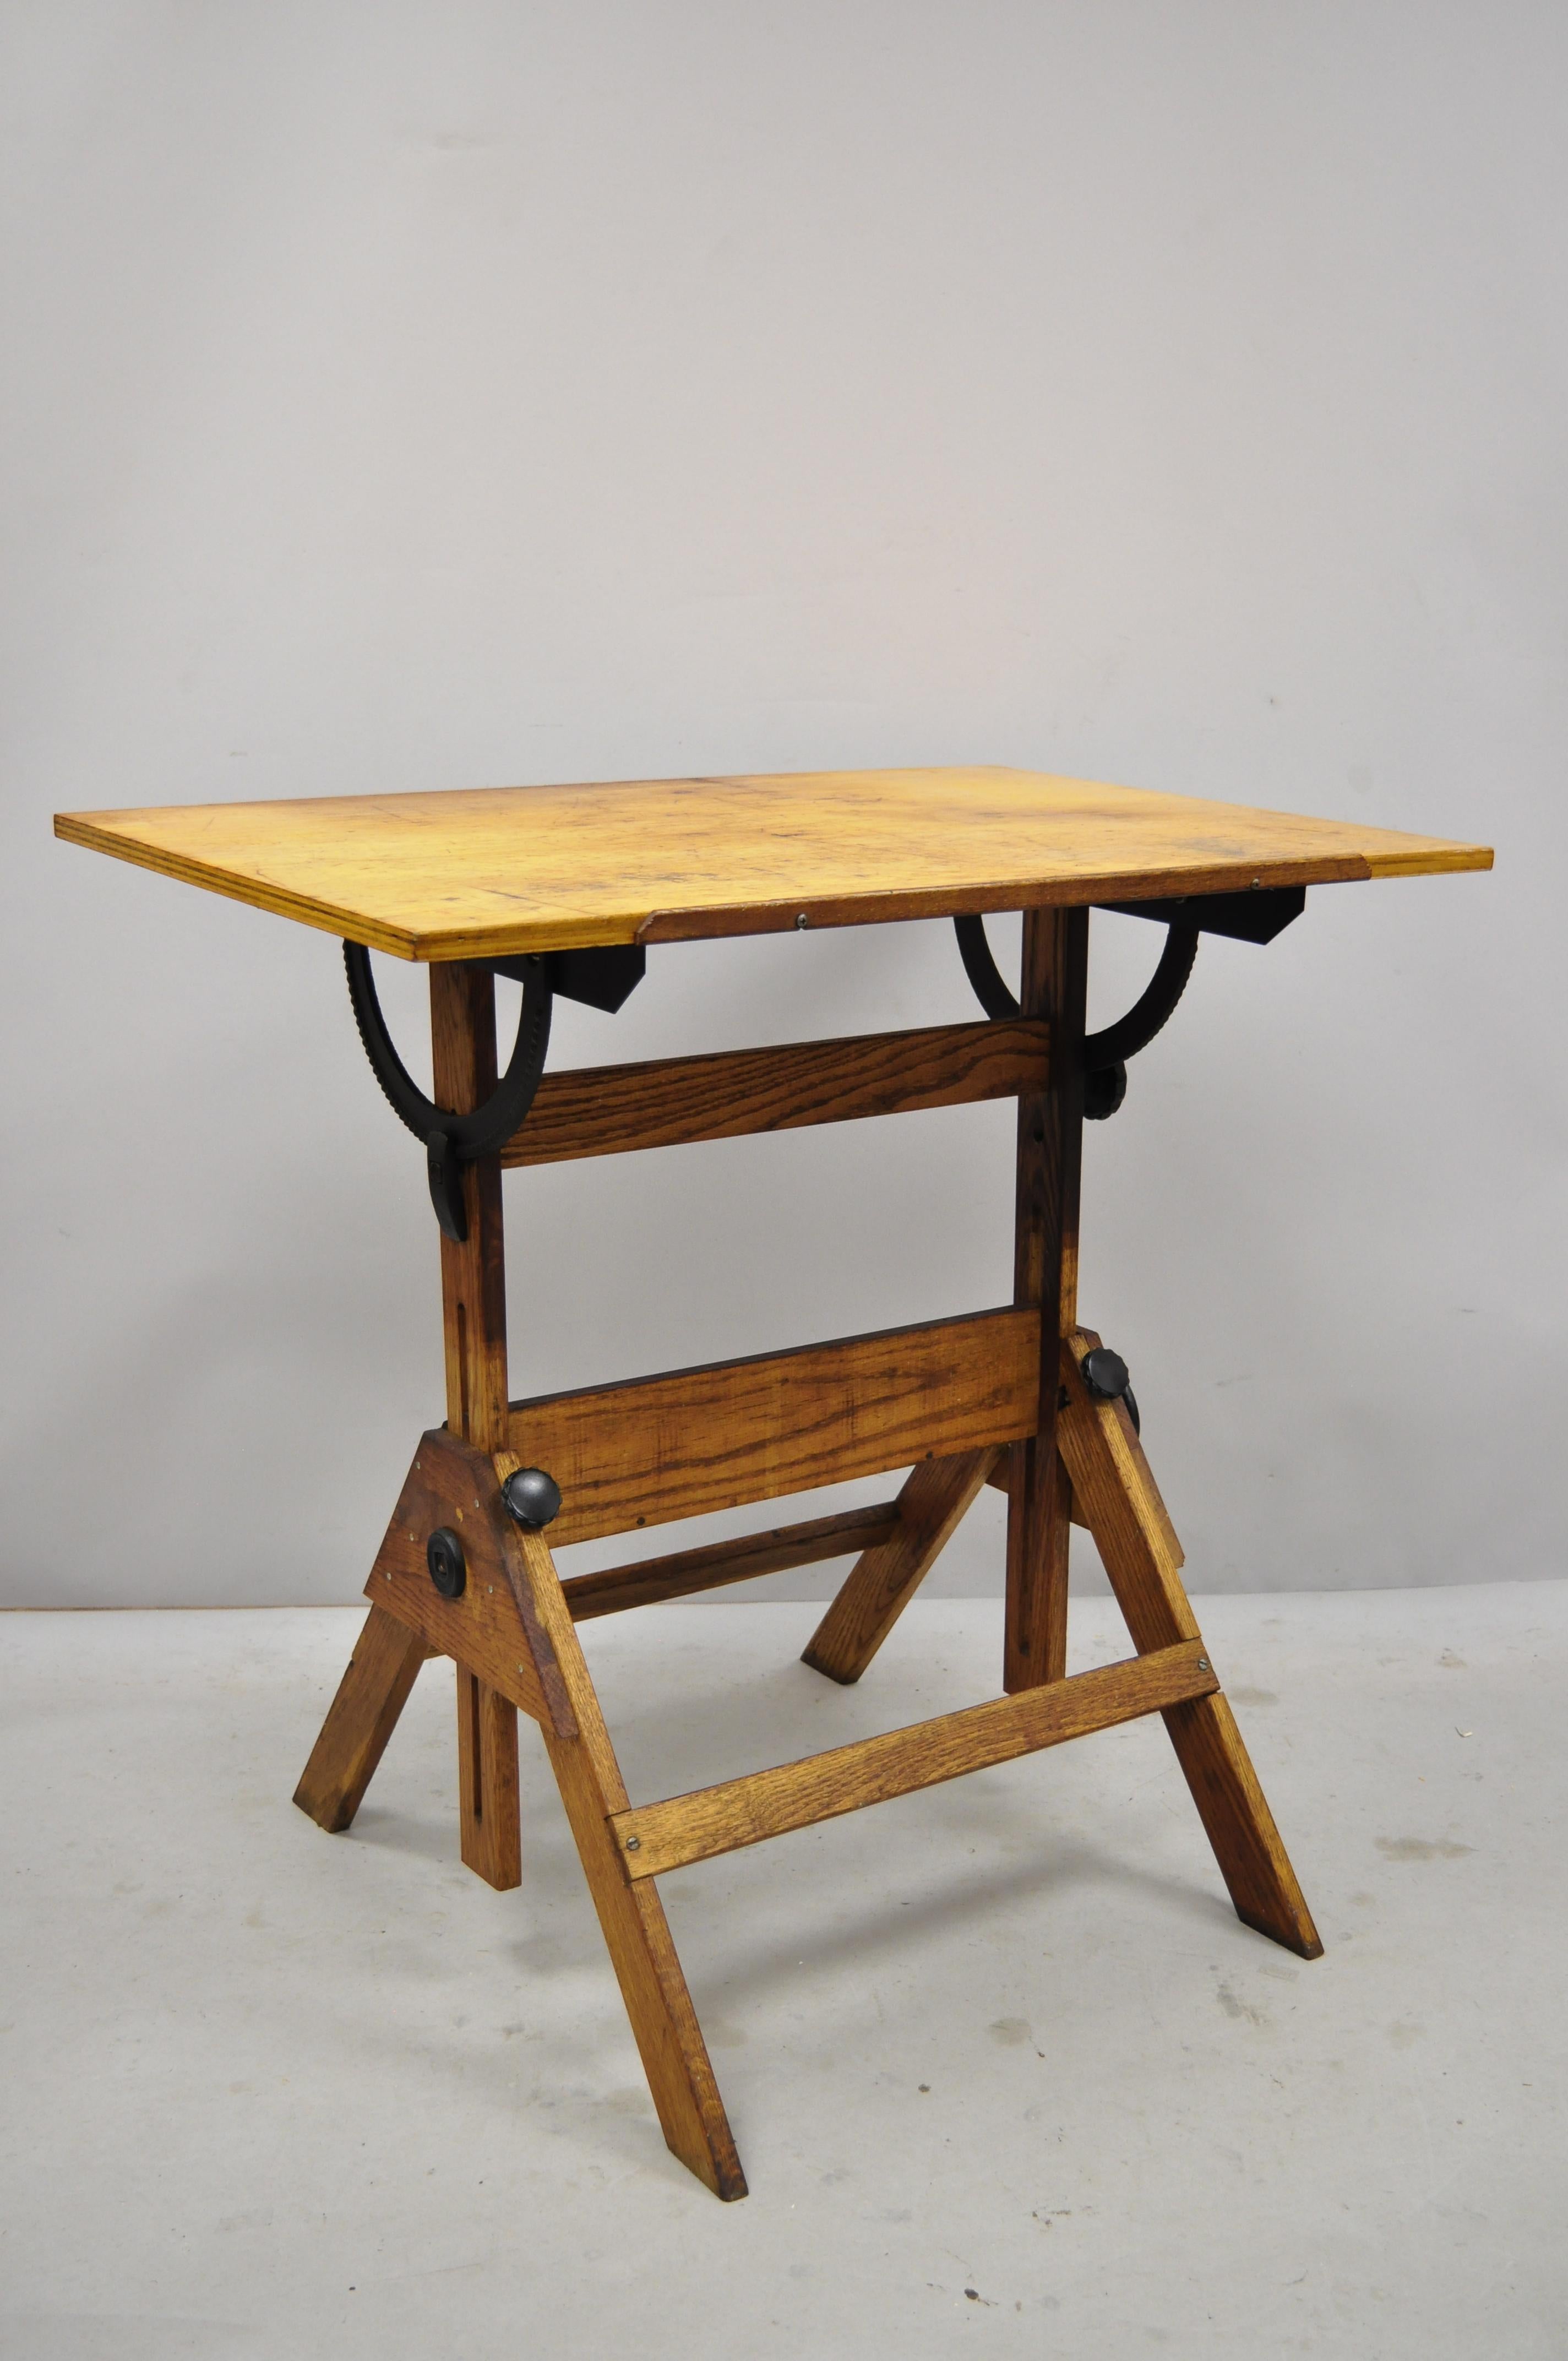 Vintage oakwood and cast iron adjustable small drafting table attributed to Hamilton. Listing includes cast iron hardware, adjustable form, solid wood construction, beautiful wood grain, very nice vintage item, quality American craftsmanship.